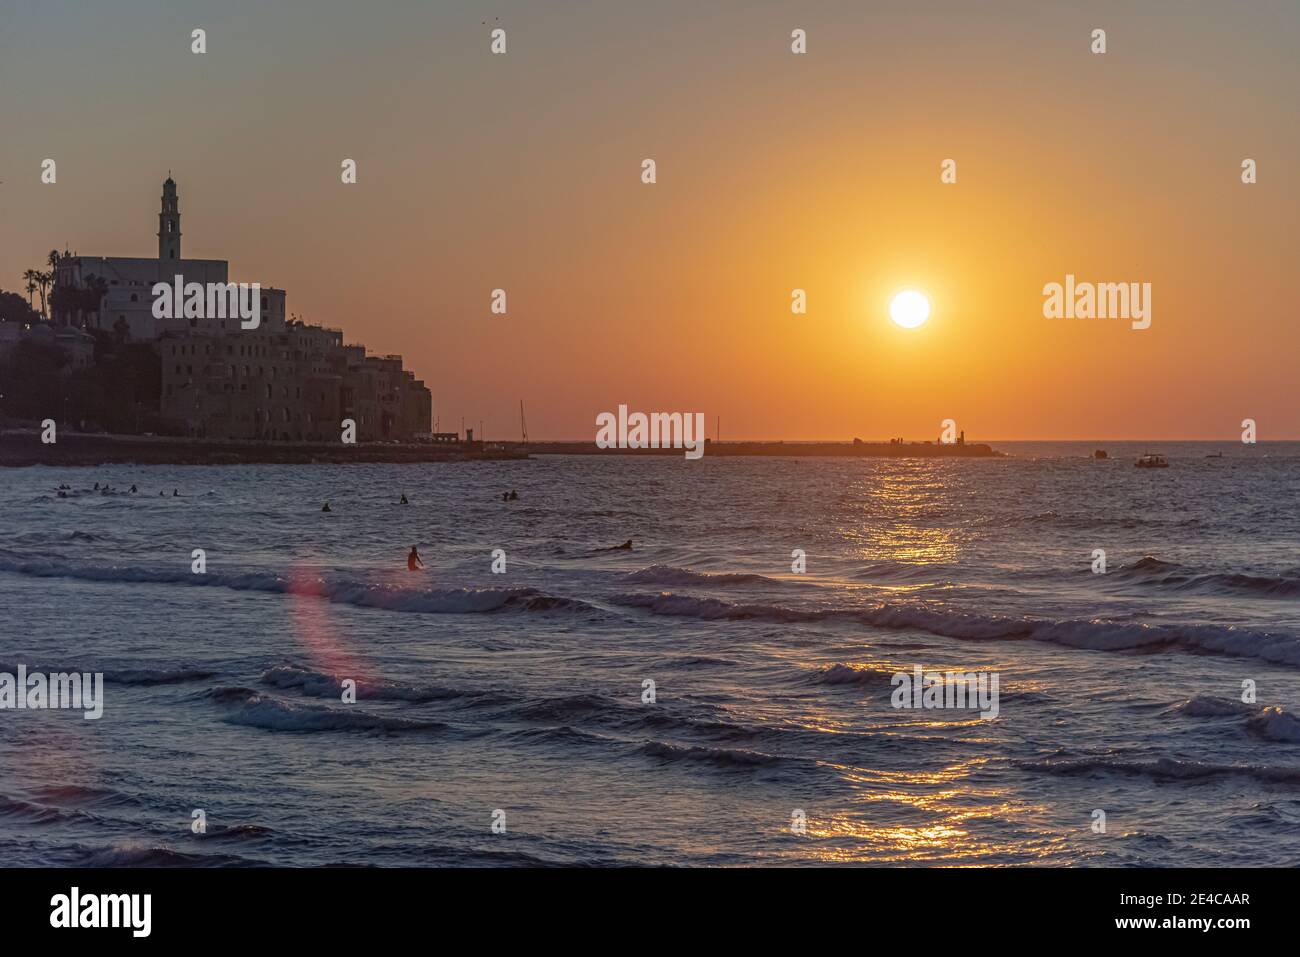 Tel Aviv, Israel - December 25, 2020: Beautiful view of a beach in the Old Port of Jaffa during a sunny and colorful sunset. High quality photo Stock Photo